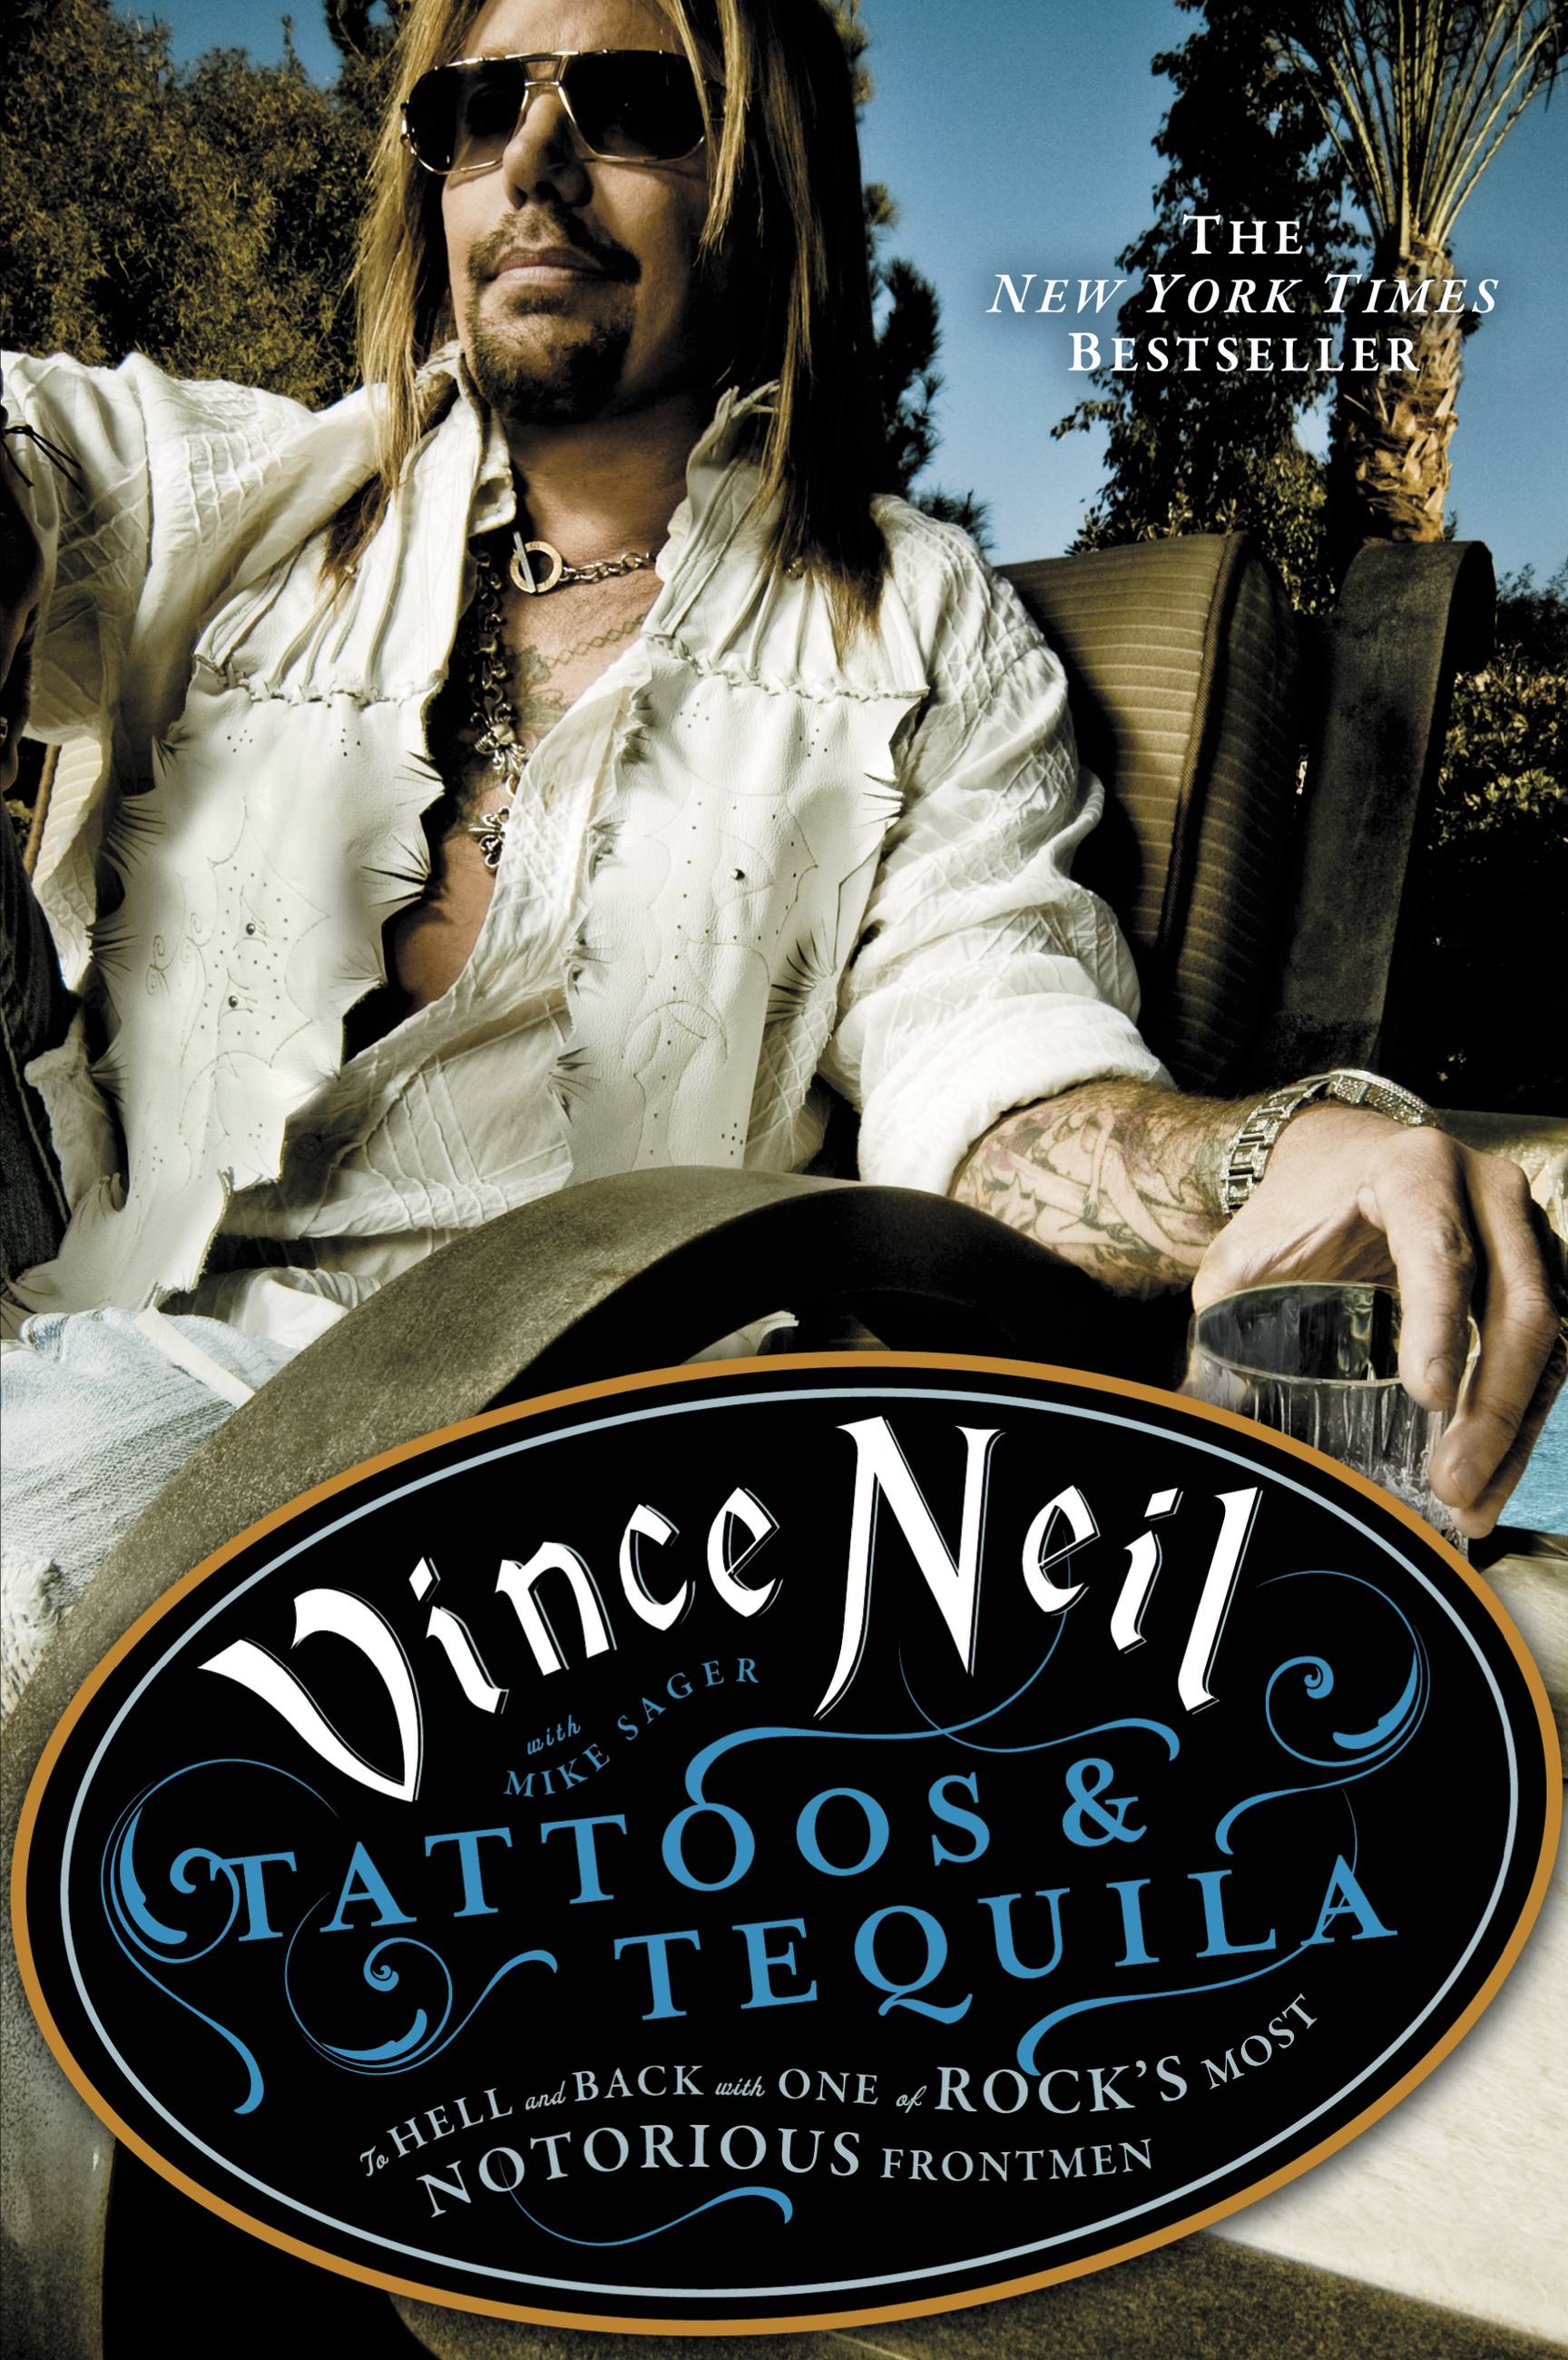 Valerie Rios Porn - Tattoos & Tequila by Vince Neil | Hachette Book Group